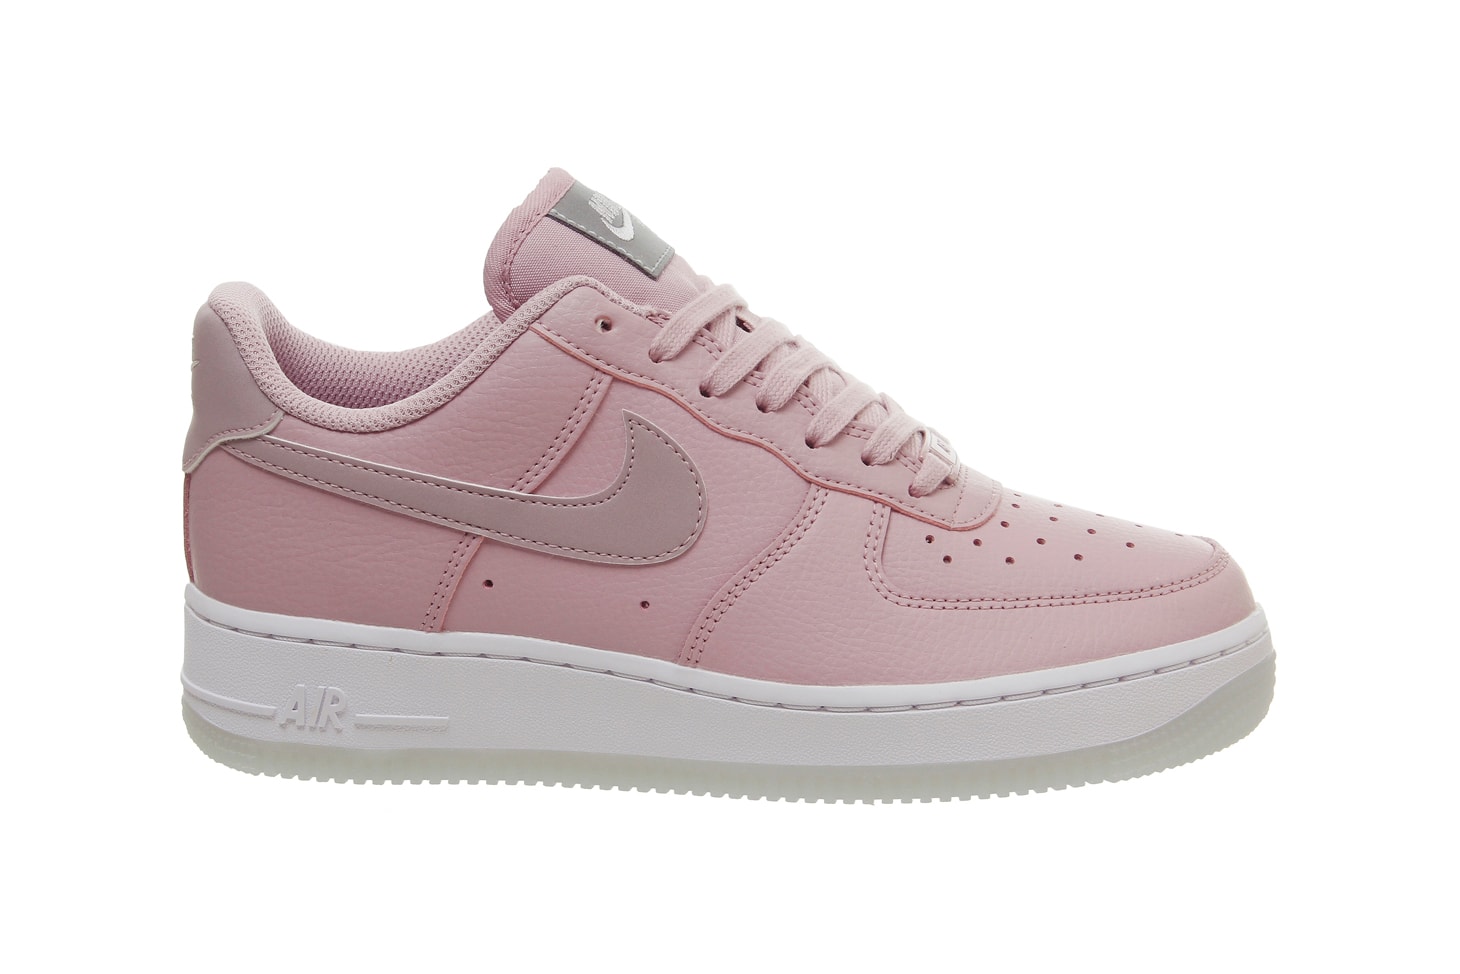 Nike Air Force 1 Plum Chalk Metallic Luster Pink Silver Sneakers Trainers